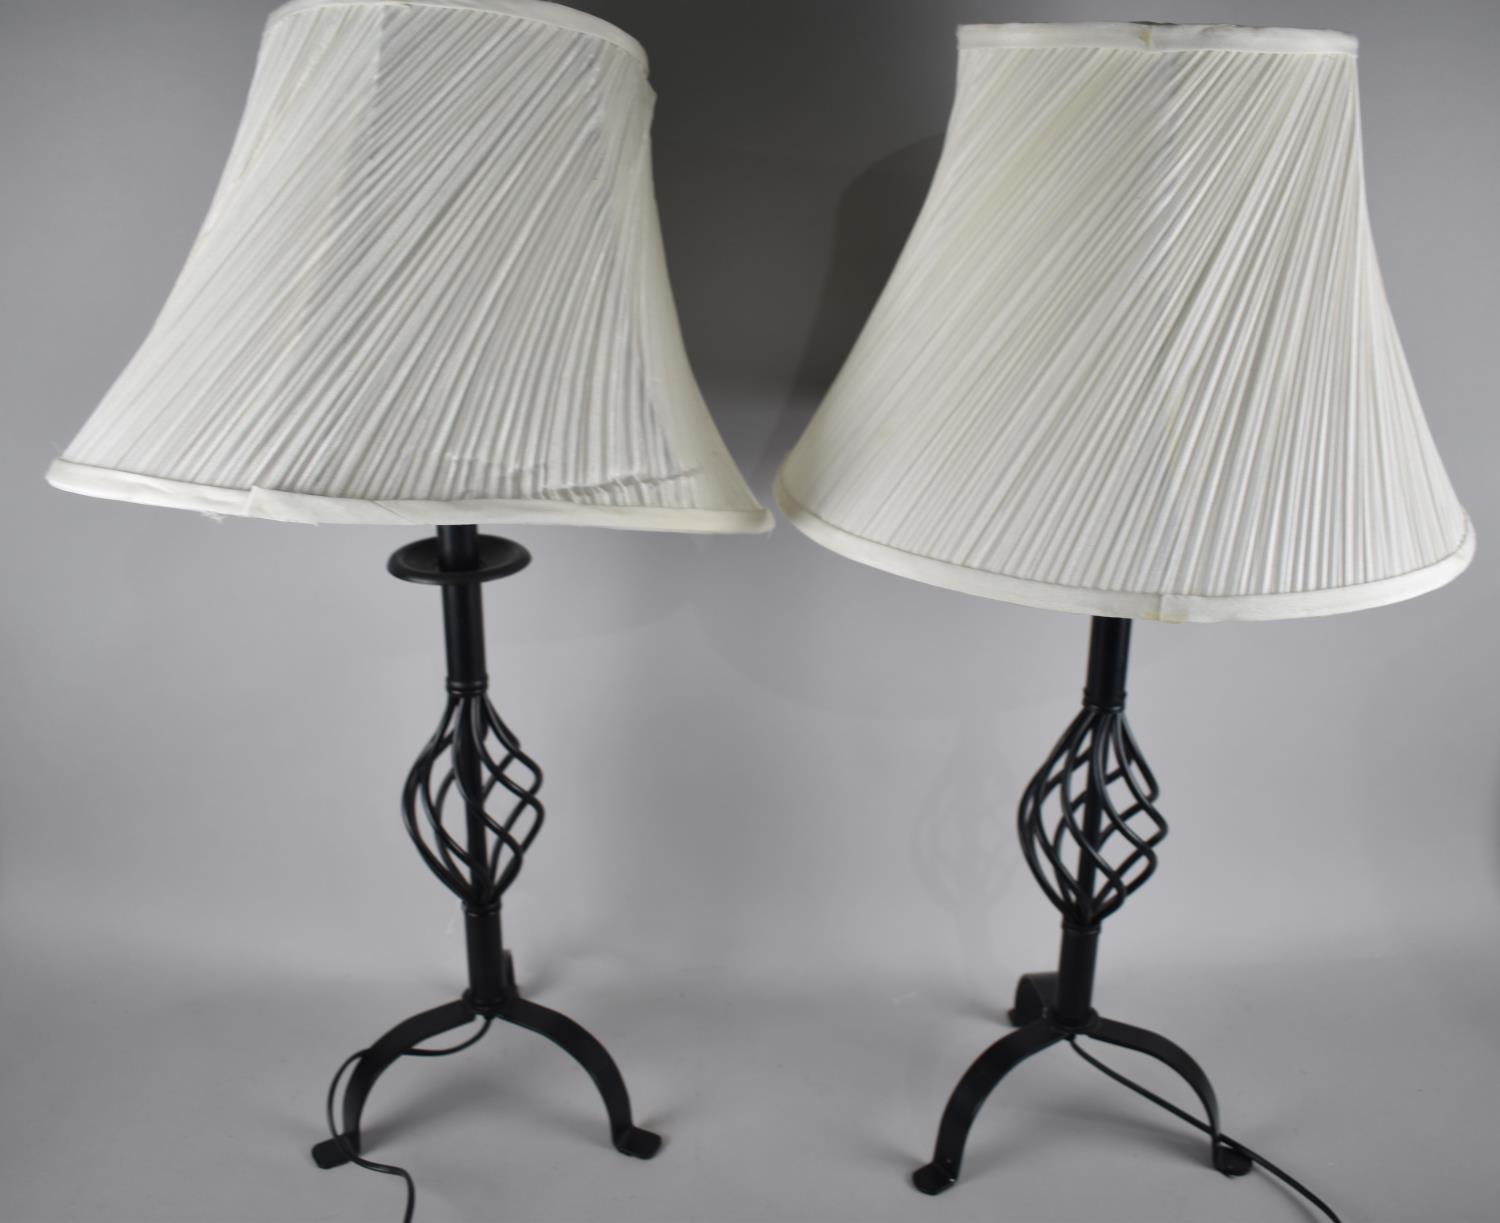 A Pair of Modern Wrought Iron Table Lamps and Shades, Overall Height 77cm